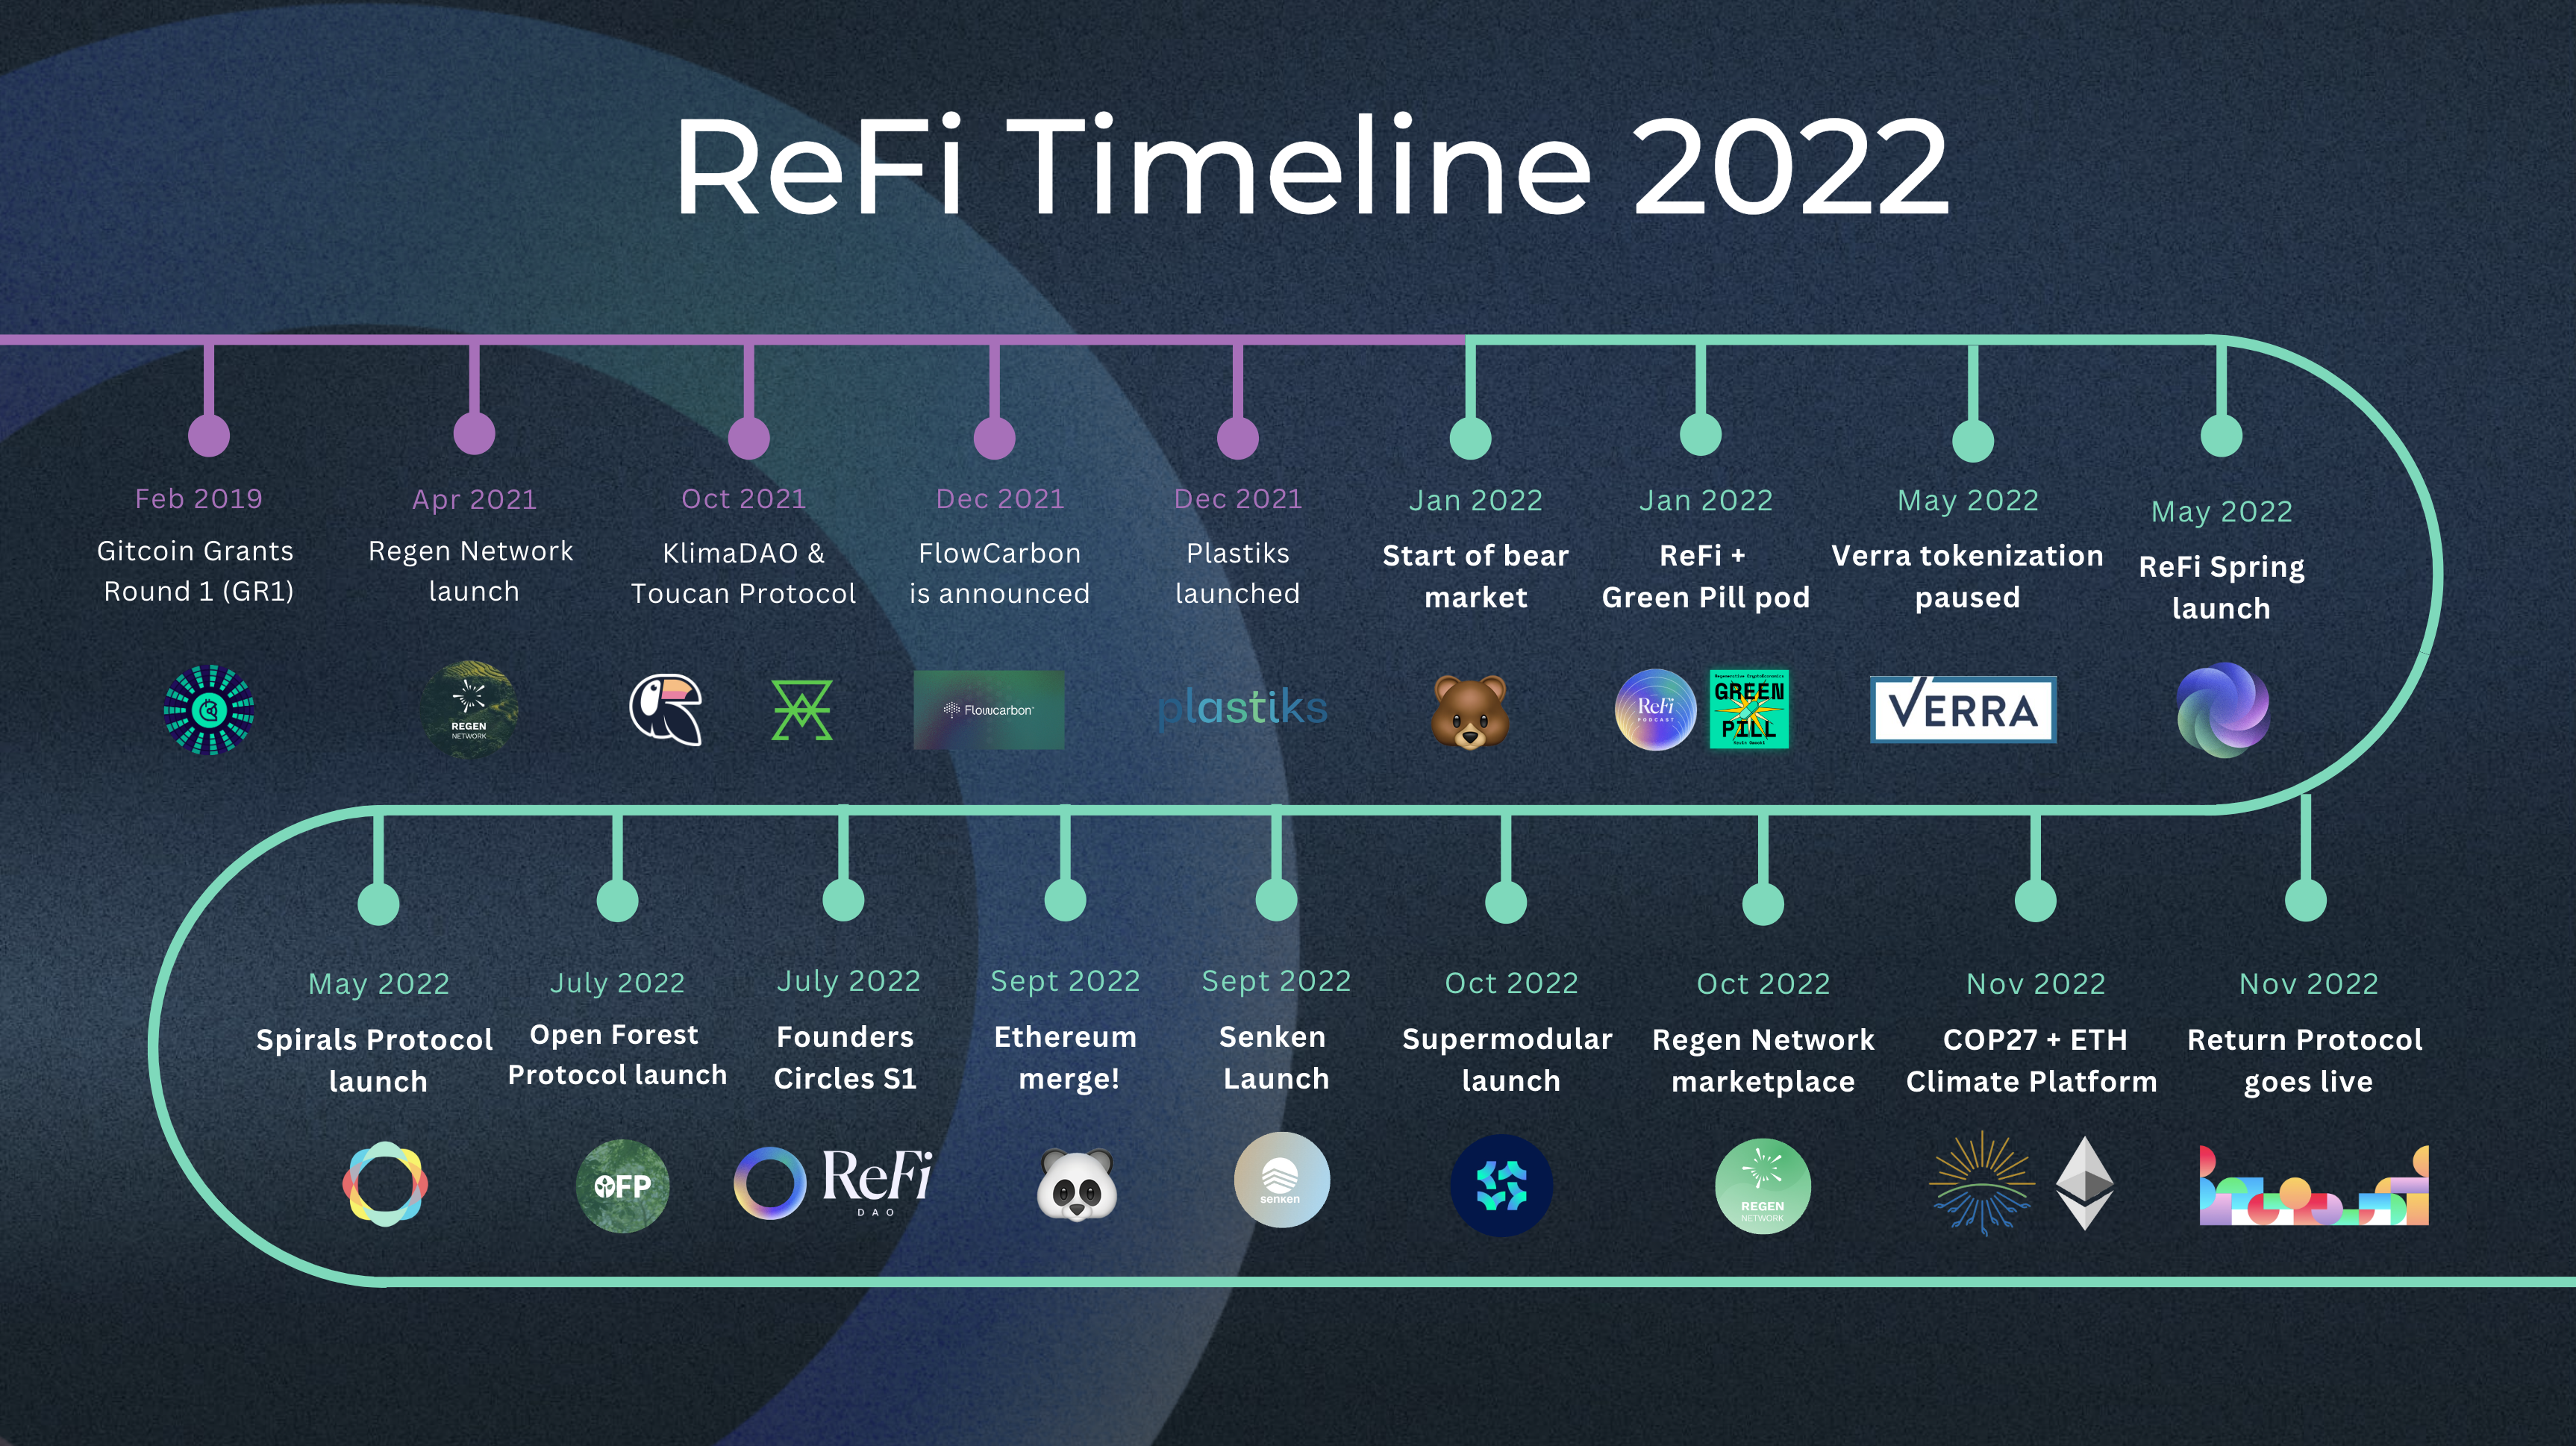 The birth and rise of the ReFi movement - key moments and highlights.